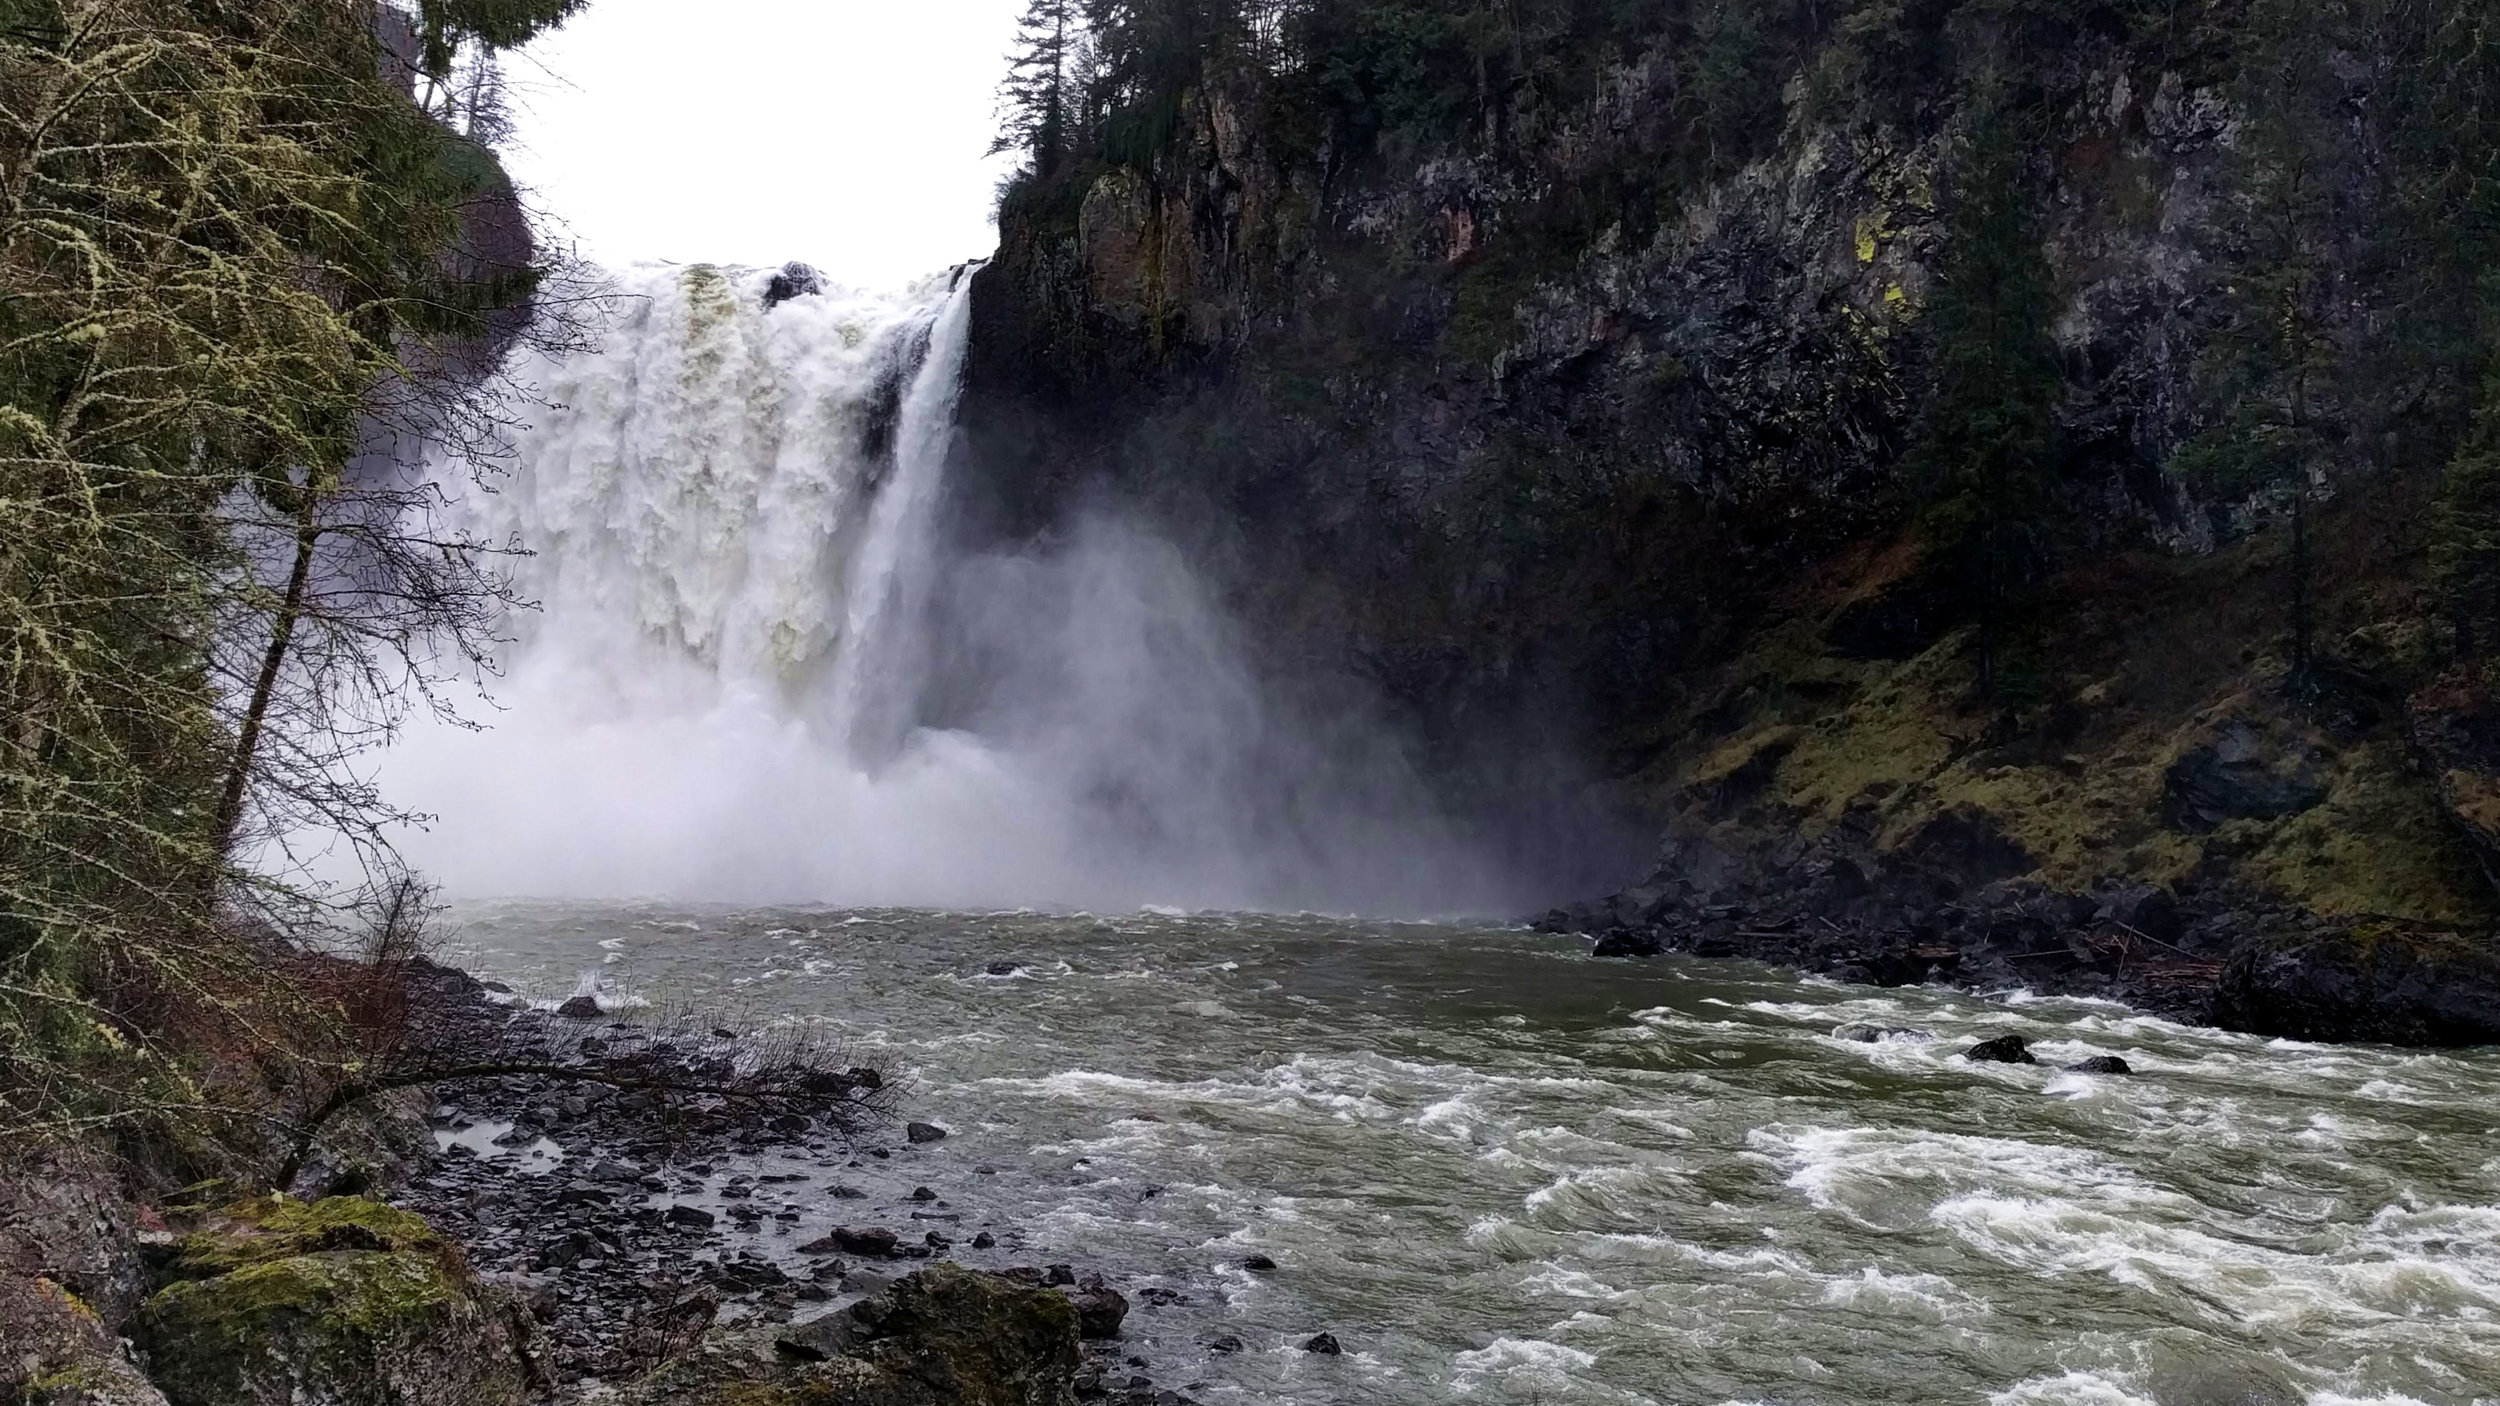 Snoqualmie Falls waterfall from the lower deck